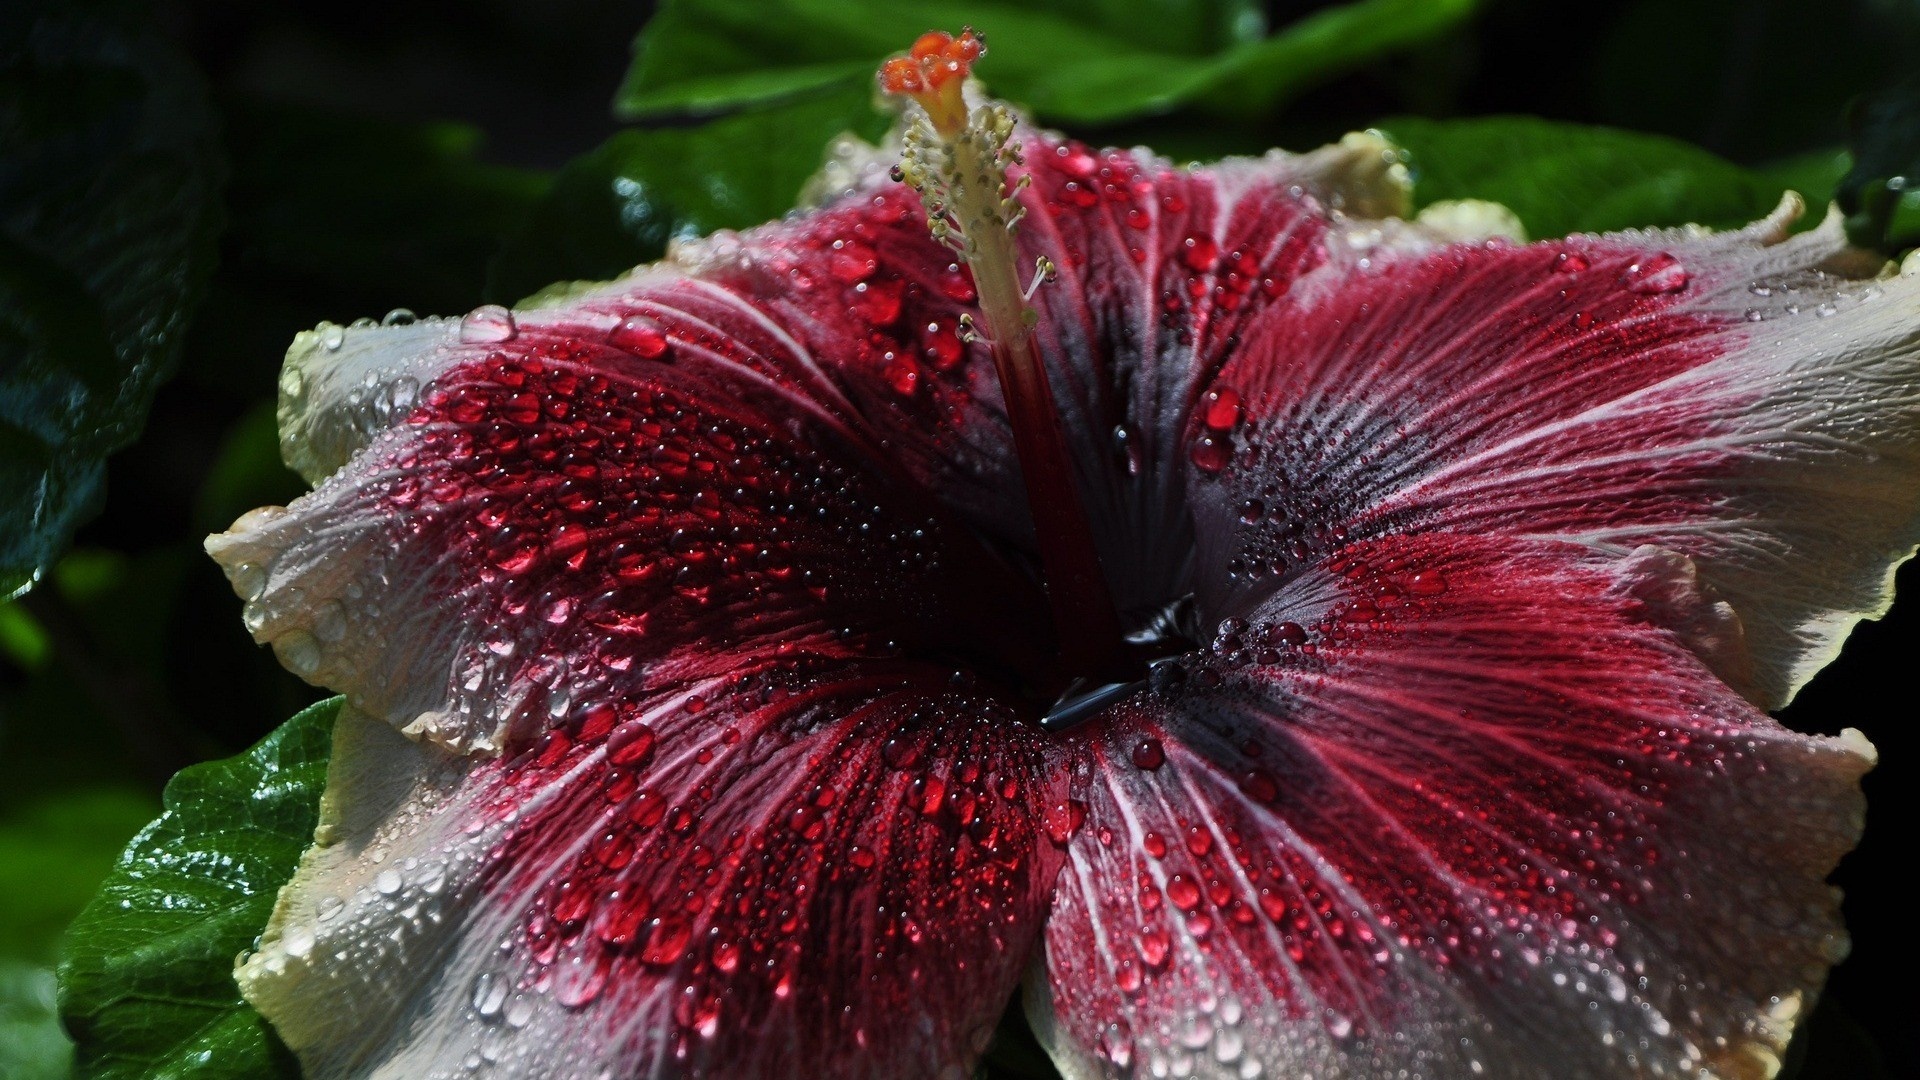 Hibiscus wallpapers, Vibrant pictures, Stunning images, Natural beauty, 1920x1080 Full HD Desktop